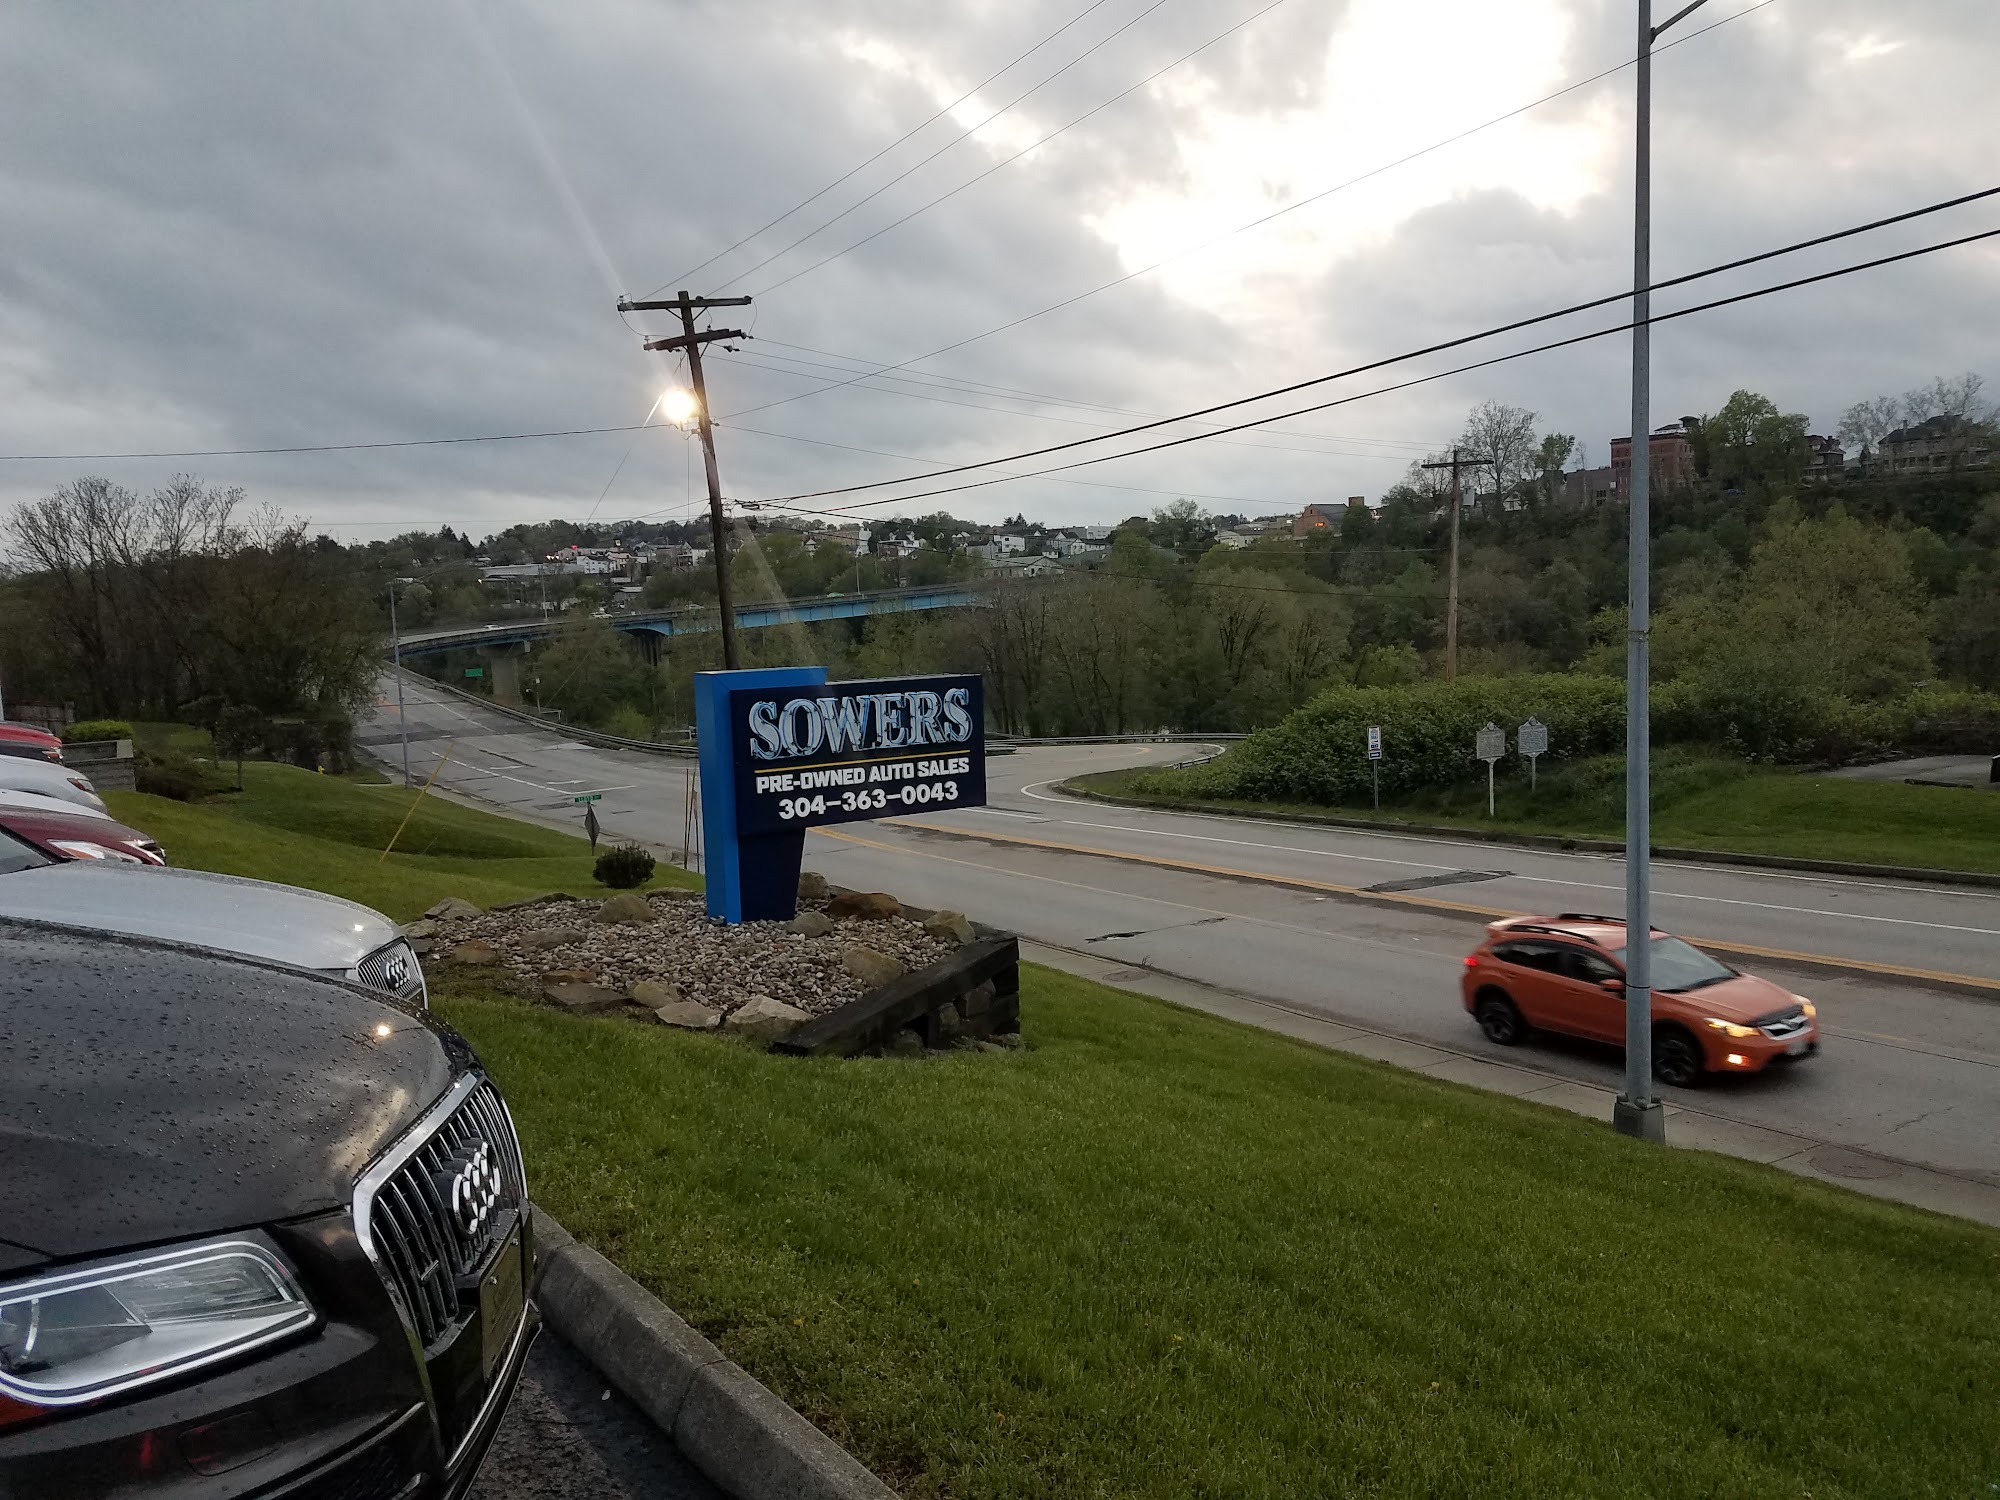 Sowers Pre-Owned Auto Sales